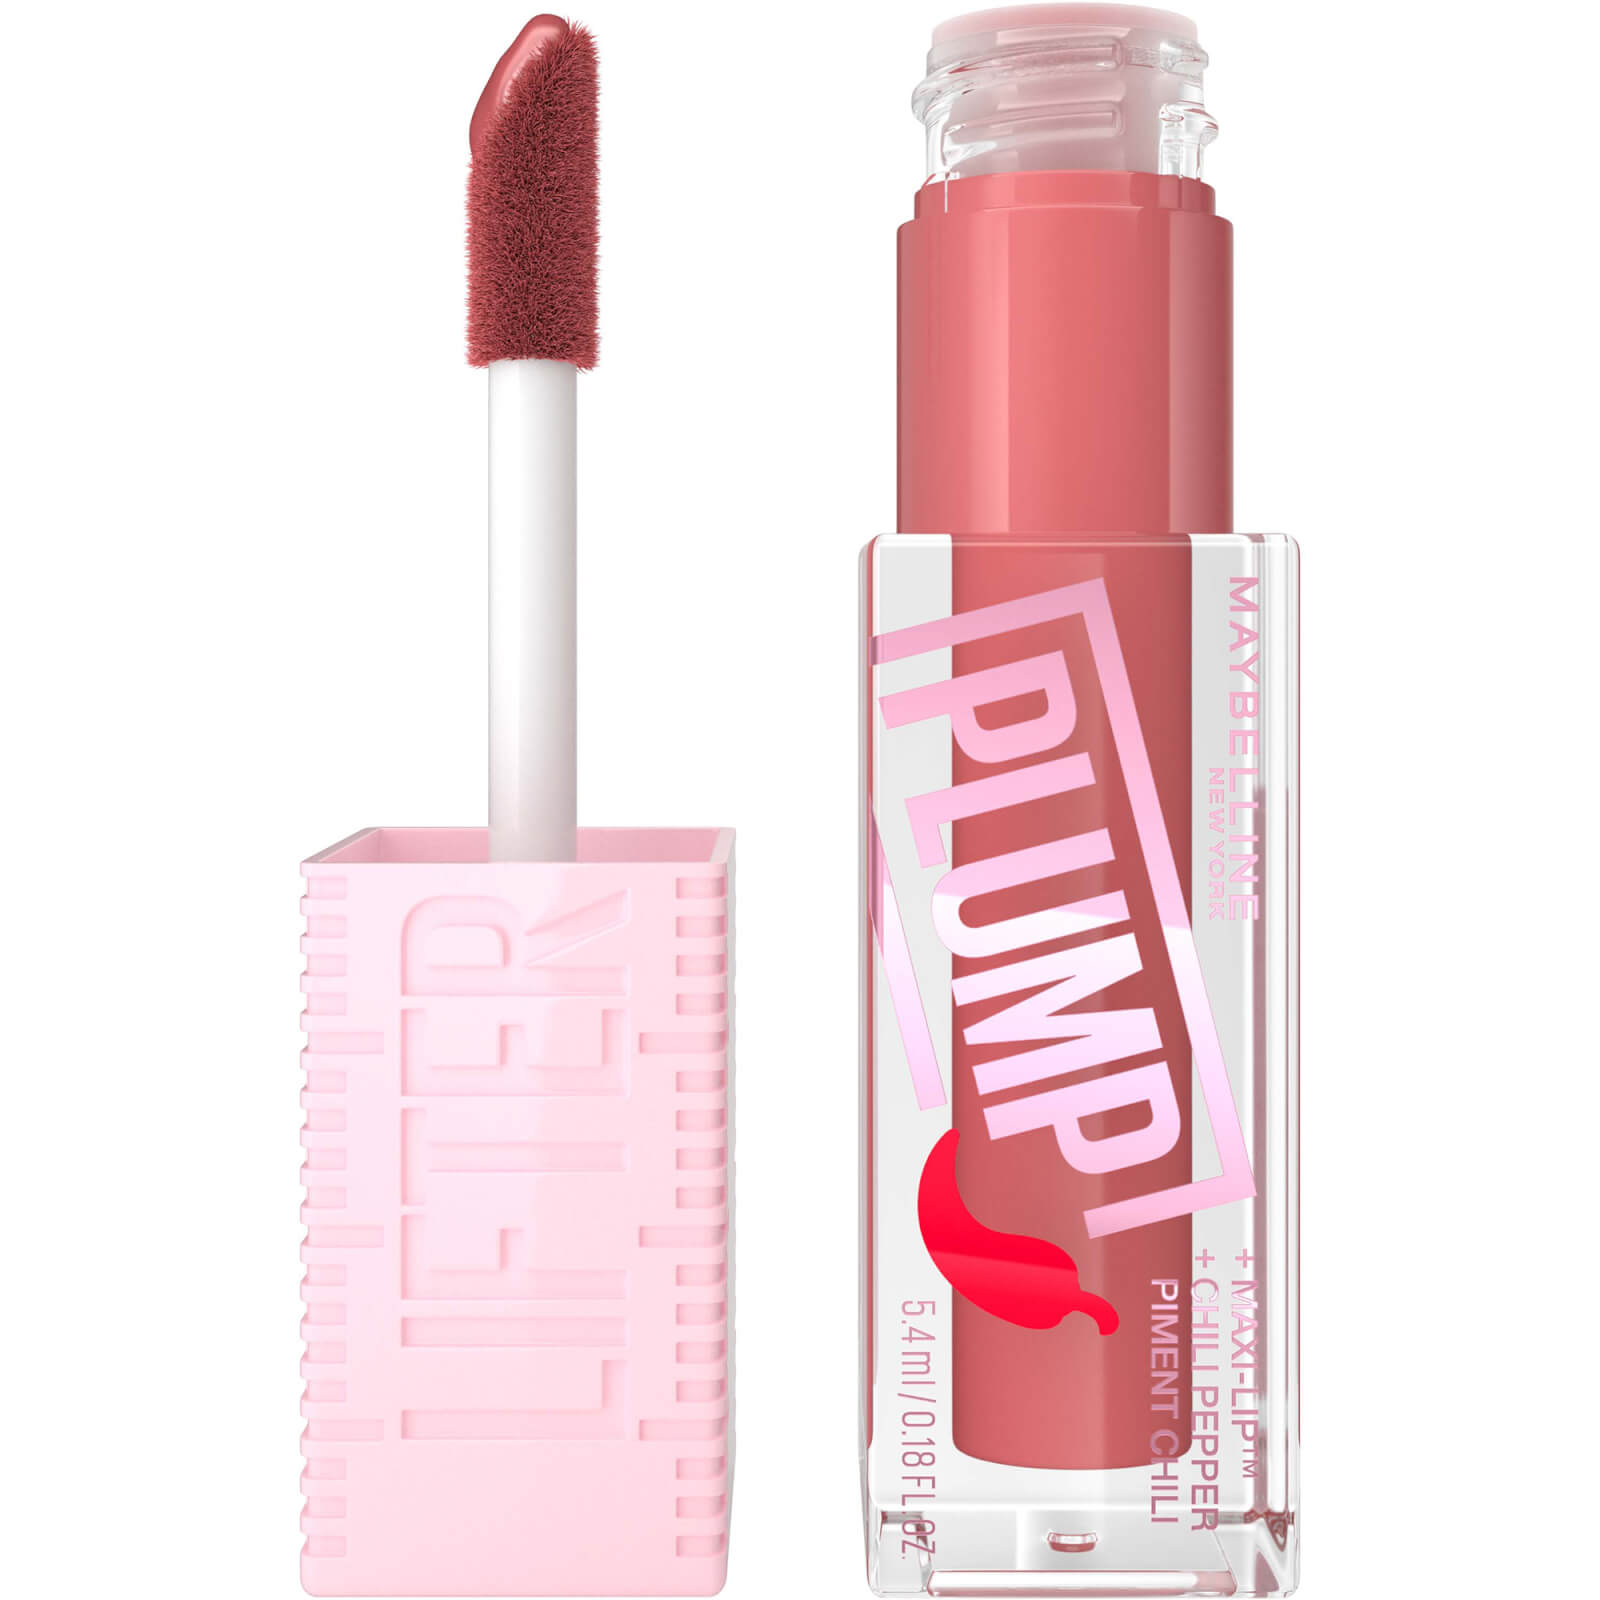 maybelline lifter gloss plumping lip gloss lasting hydration formula with hyaluronic acid and chilli pepper (various shades) - peach fever